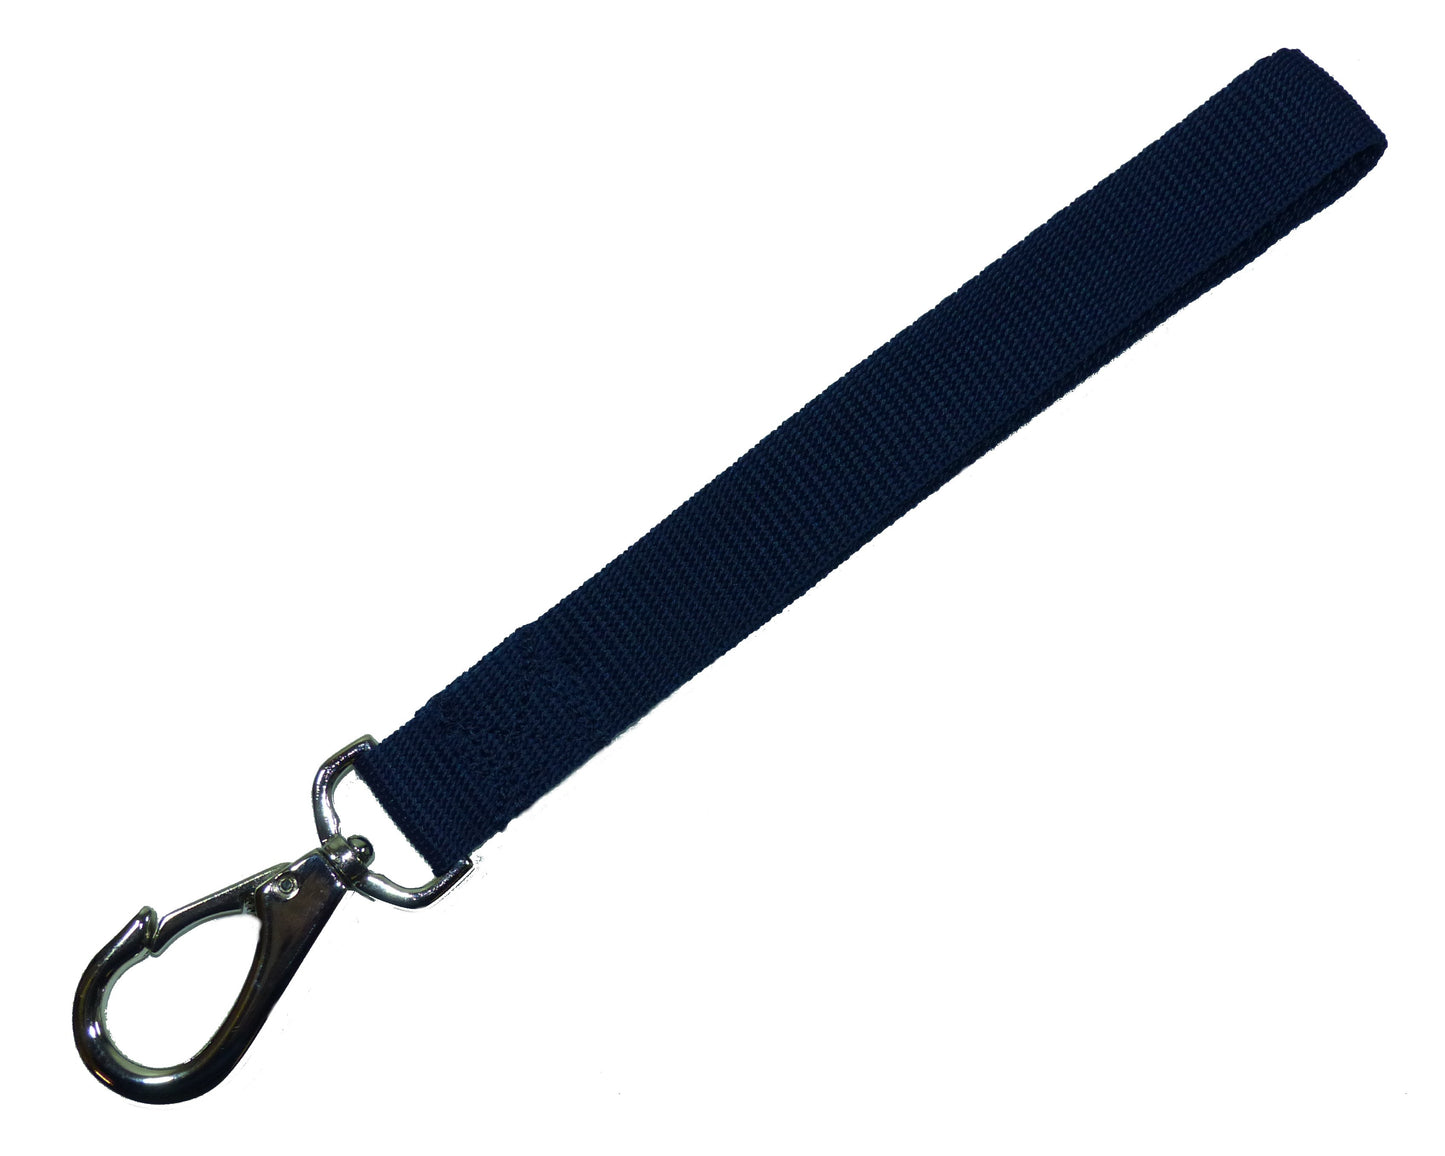 25mm Buggy Handle Carry Strap in navy blue